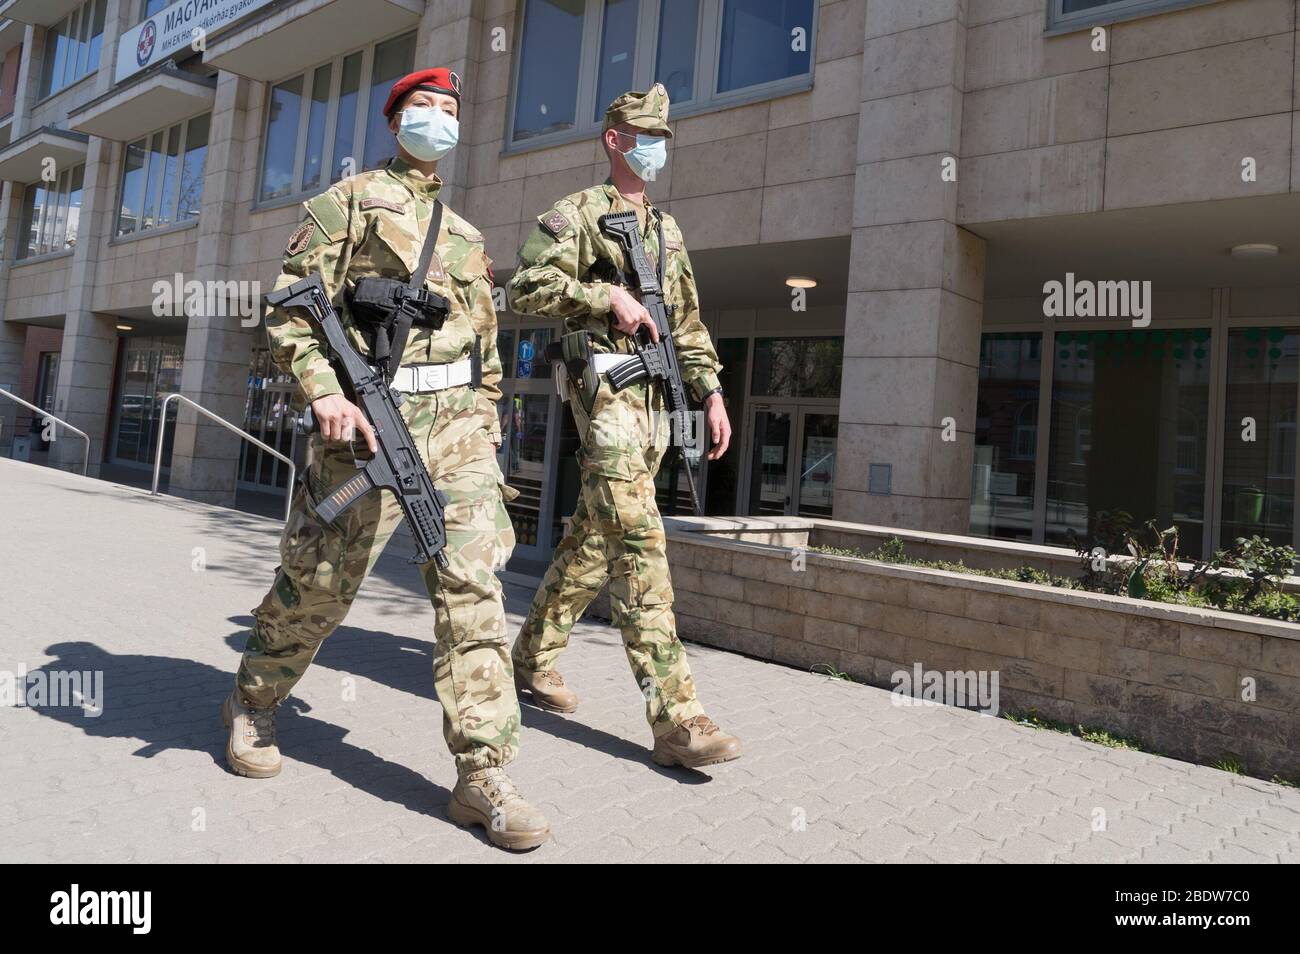 Budapest, Hungary. 9th Apr, 2020. Military personnel patrol along a street in Budapest, Hungary, on April 9, 2020. The Hungarian government will indefinitely extend the lockdown imposed nearly two weeks ago due to the coronavirus epidemic, Prime Minister Viktor Orban announced on his Facebook page on Thursday. According to official figures, the number of confirmed coronavirus cases in Hungary stood at 980 on Thursday, with 96 recoveries and 66 fatalities. Credit: Attila Volgyi/Xinhua/Alamy Live News Stock Photo